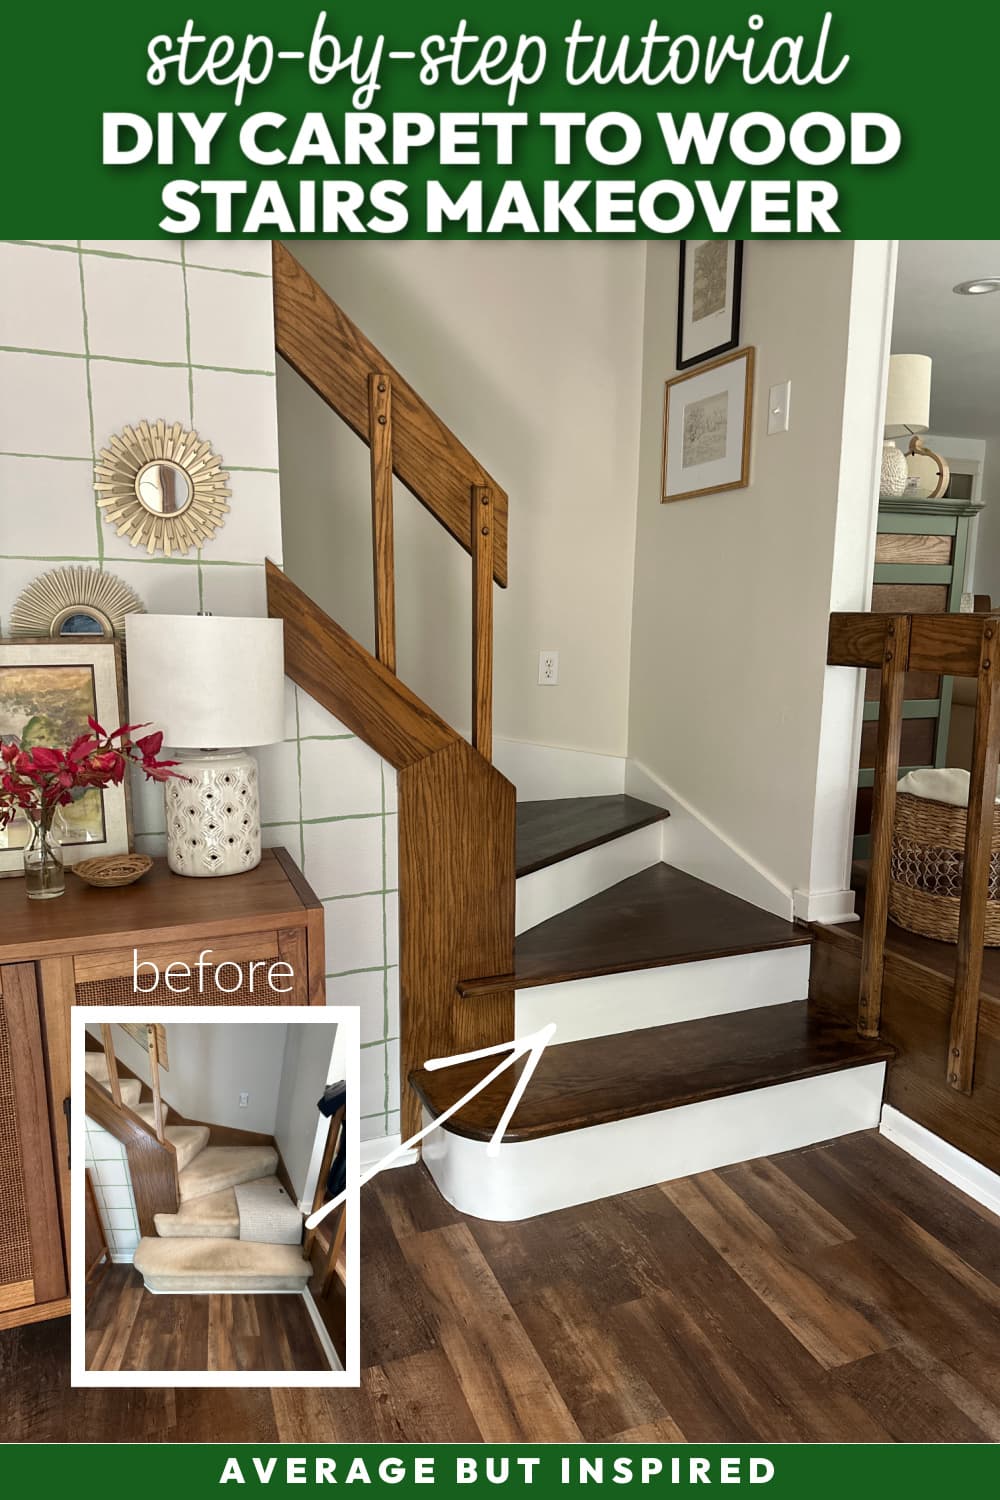 Do you convert carpeted stairs to wood? This post will tell you everything you need to know about replacing carpet on stairs with a prettier version of your existing treads.